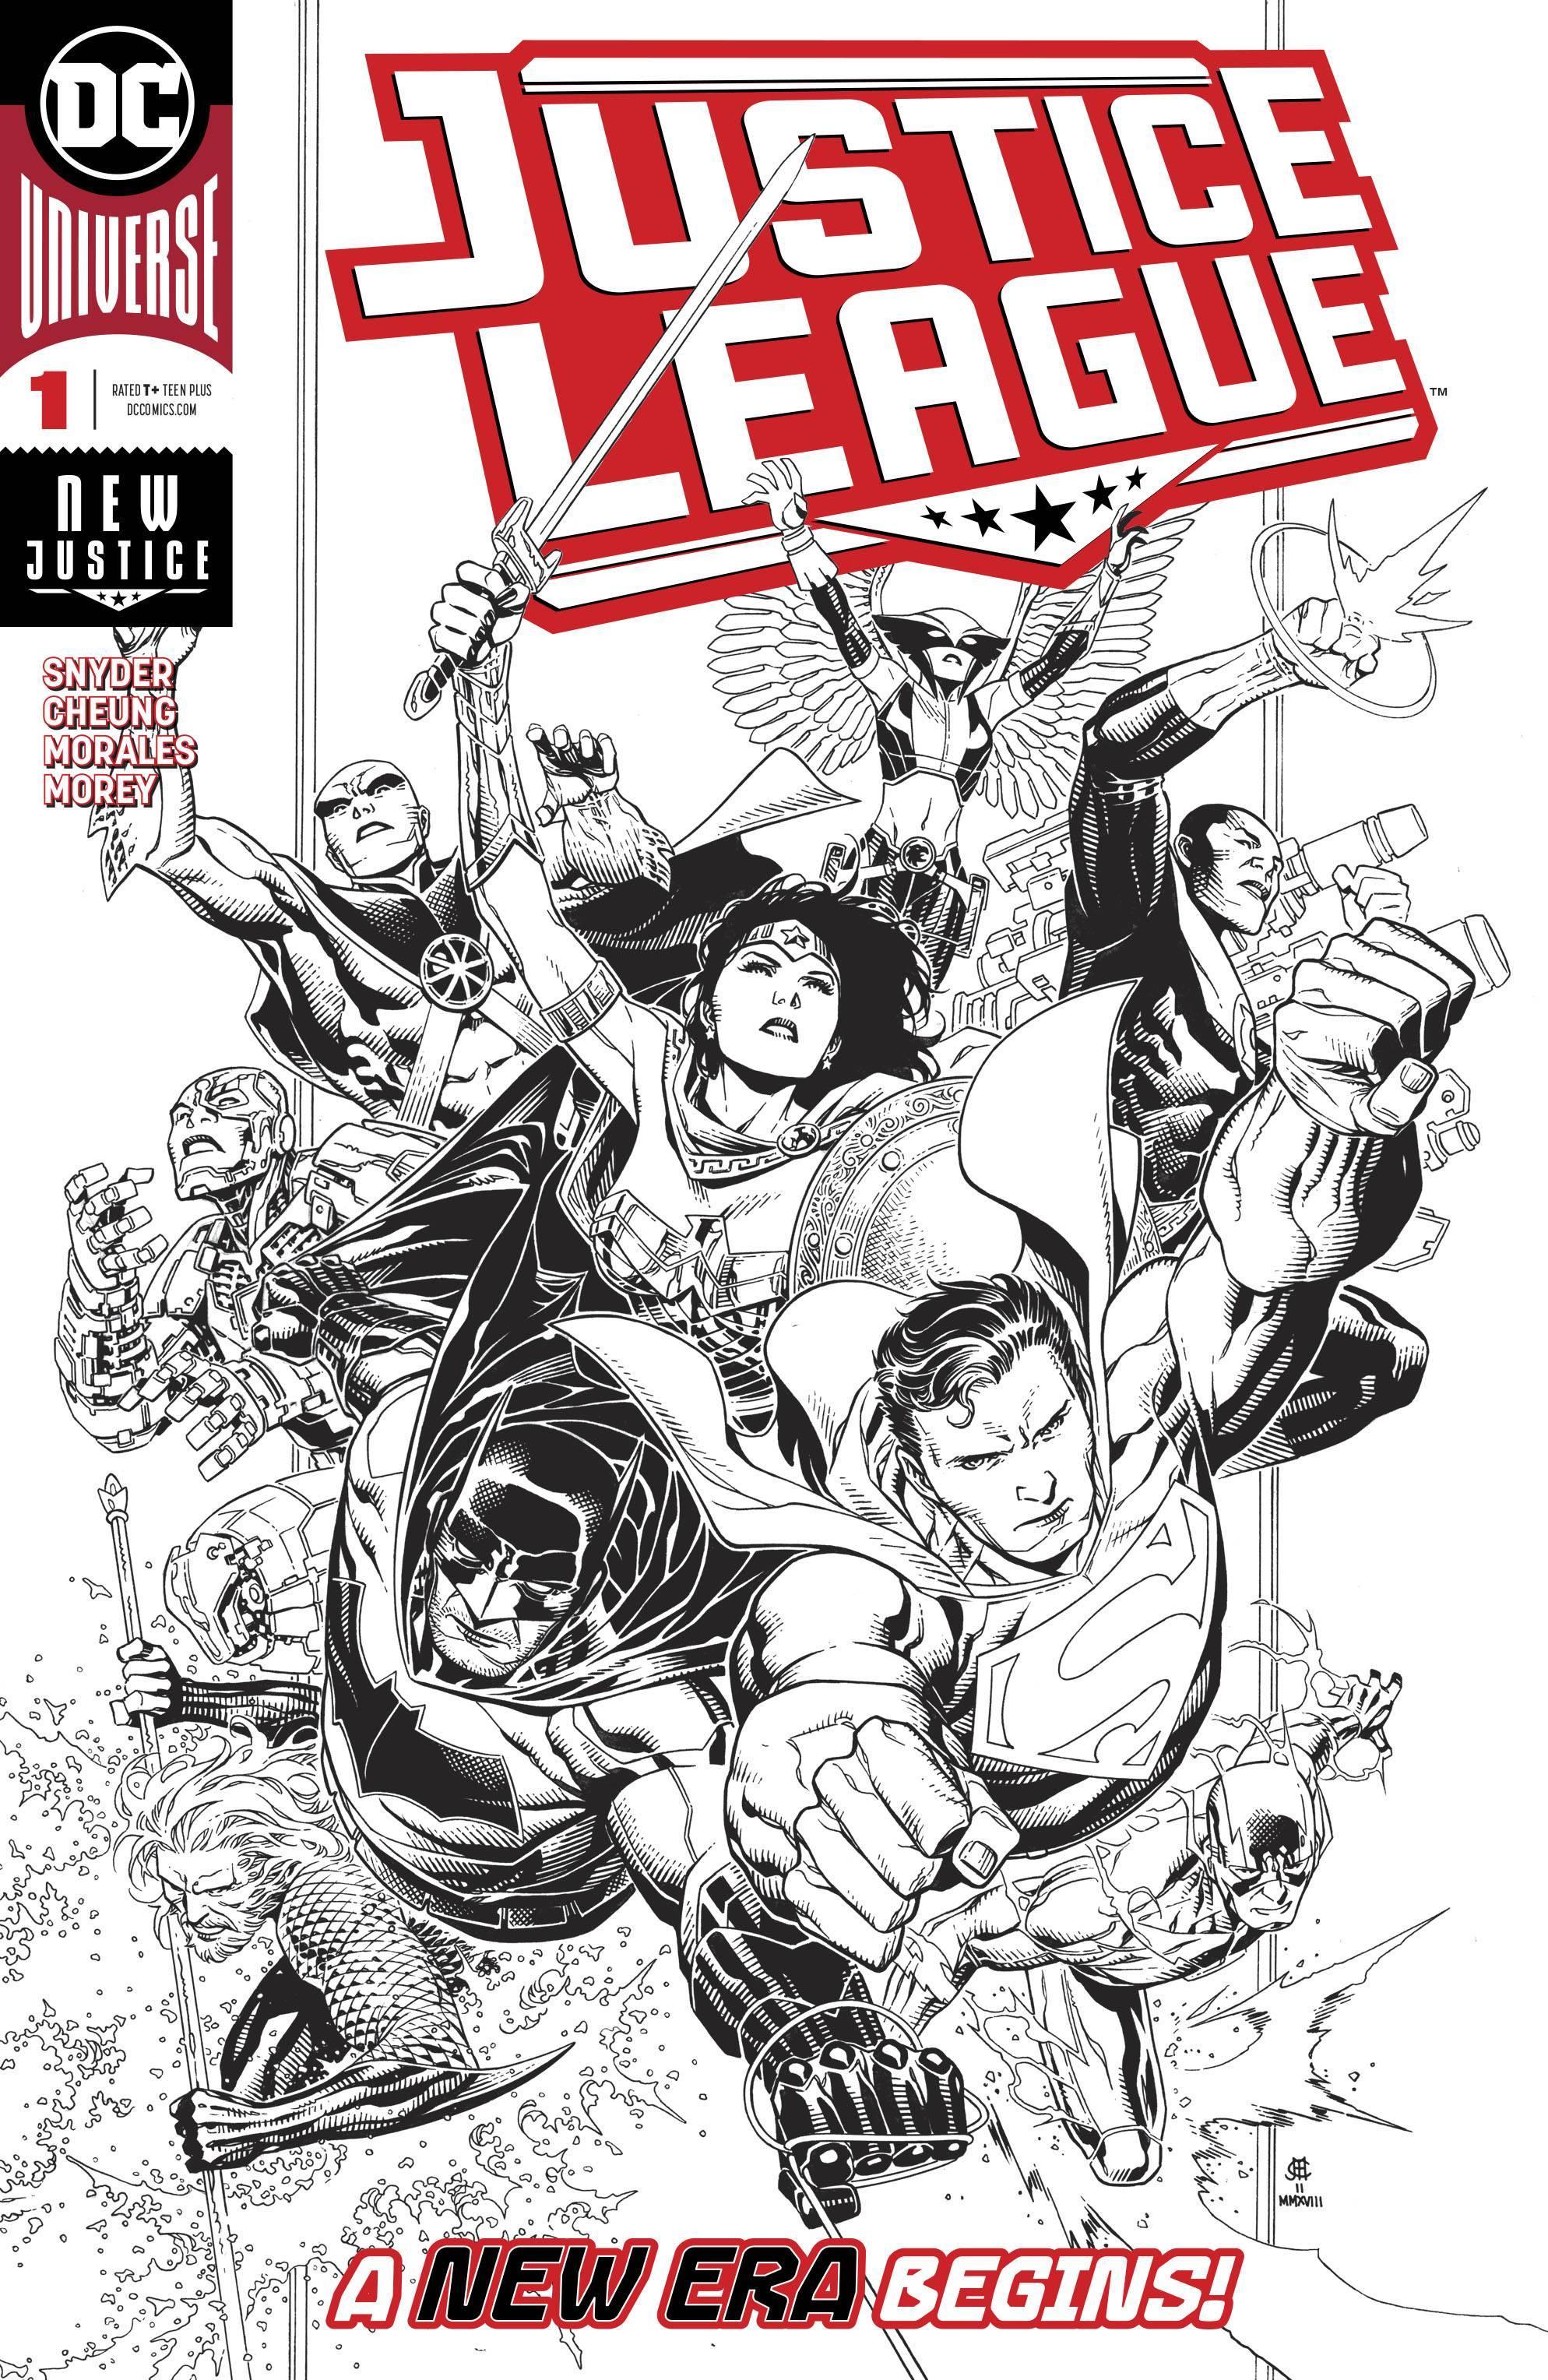 JUSTICE LEAGUE VOL 4 #1 JIM CHEUNG INKS ONLY VAR ED - Kings Comics